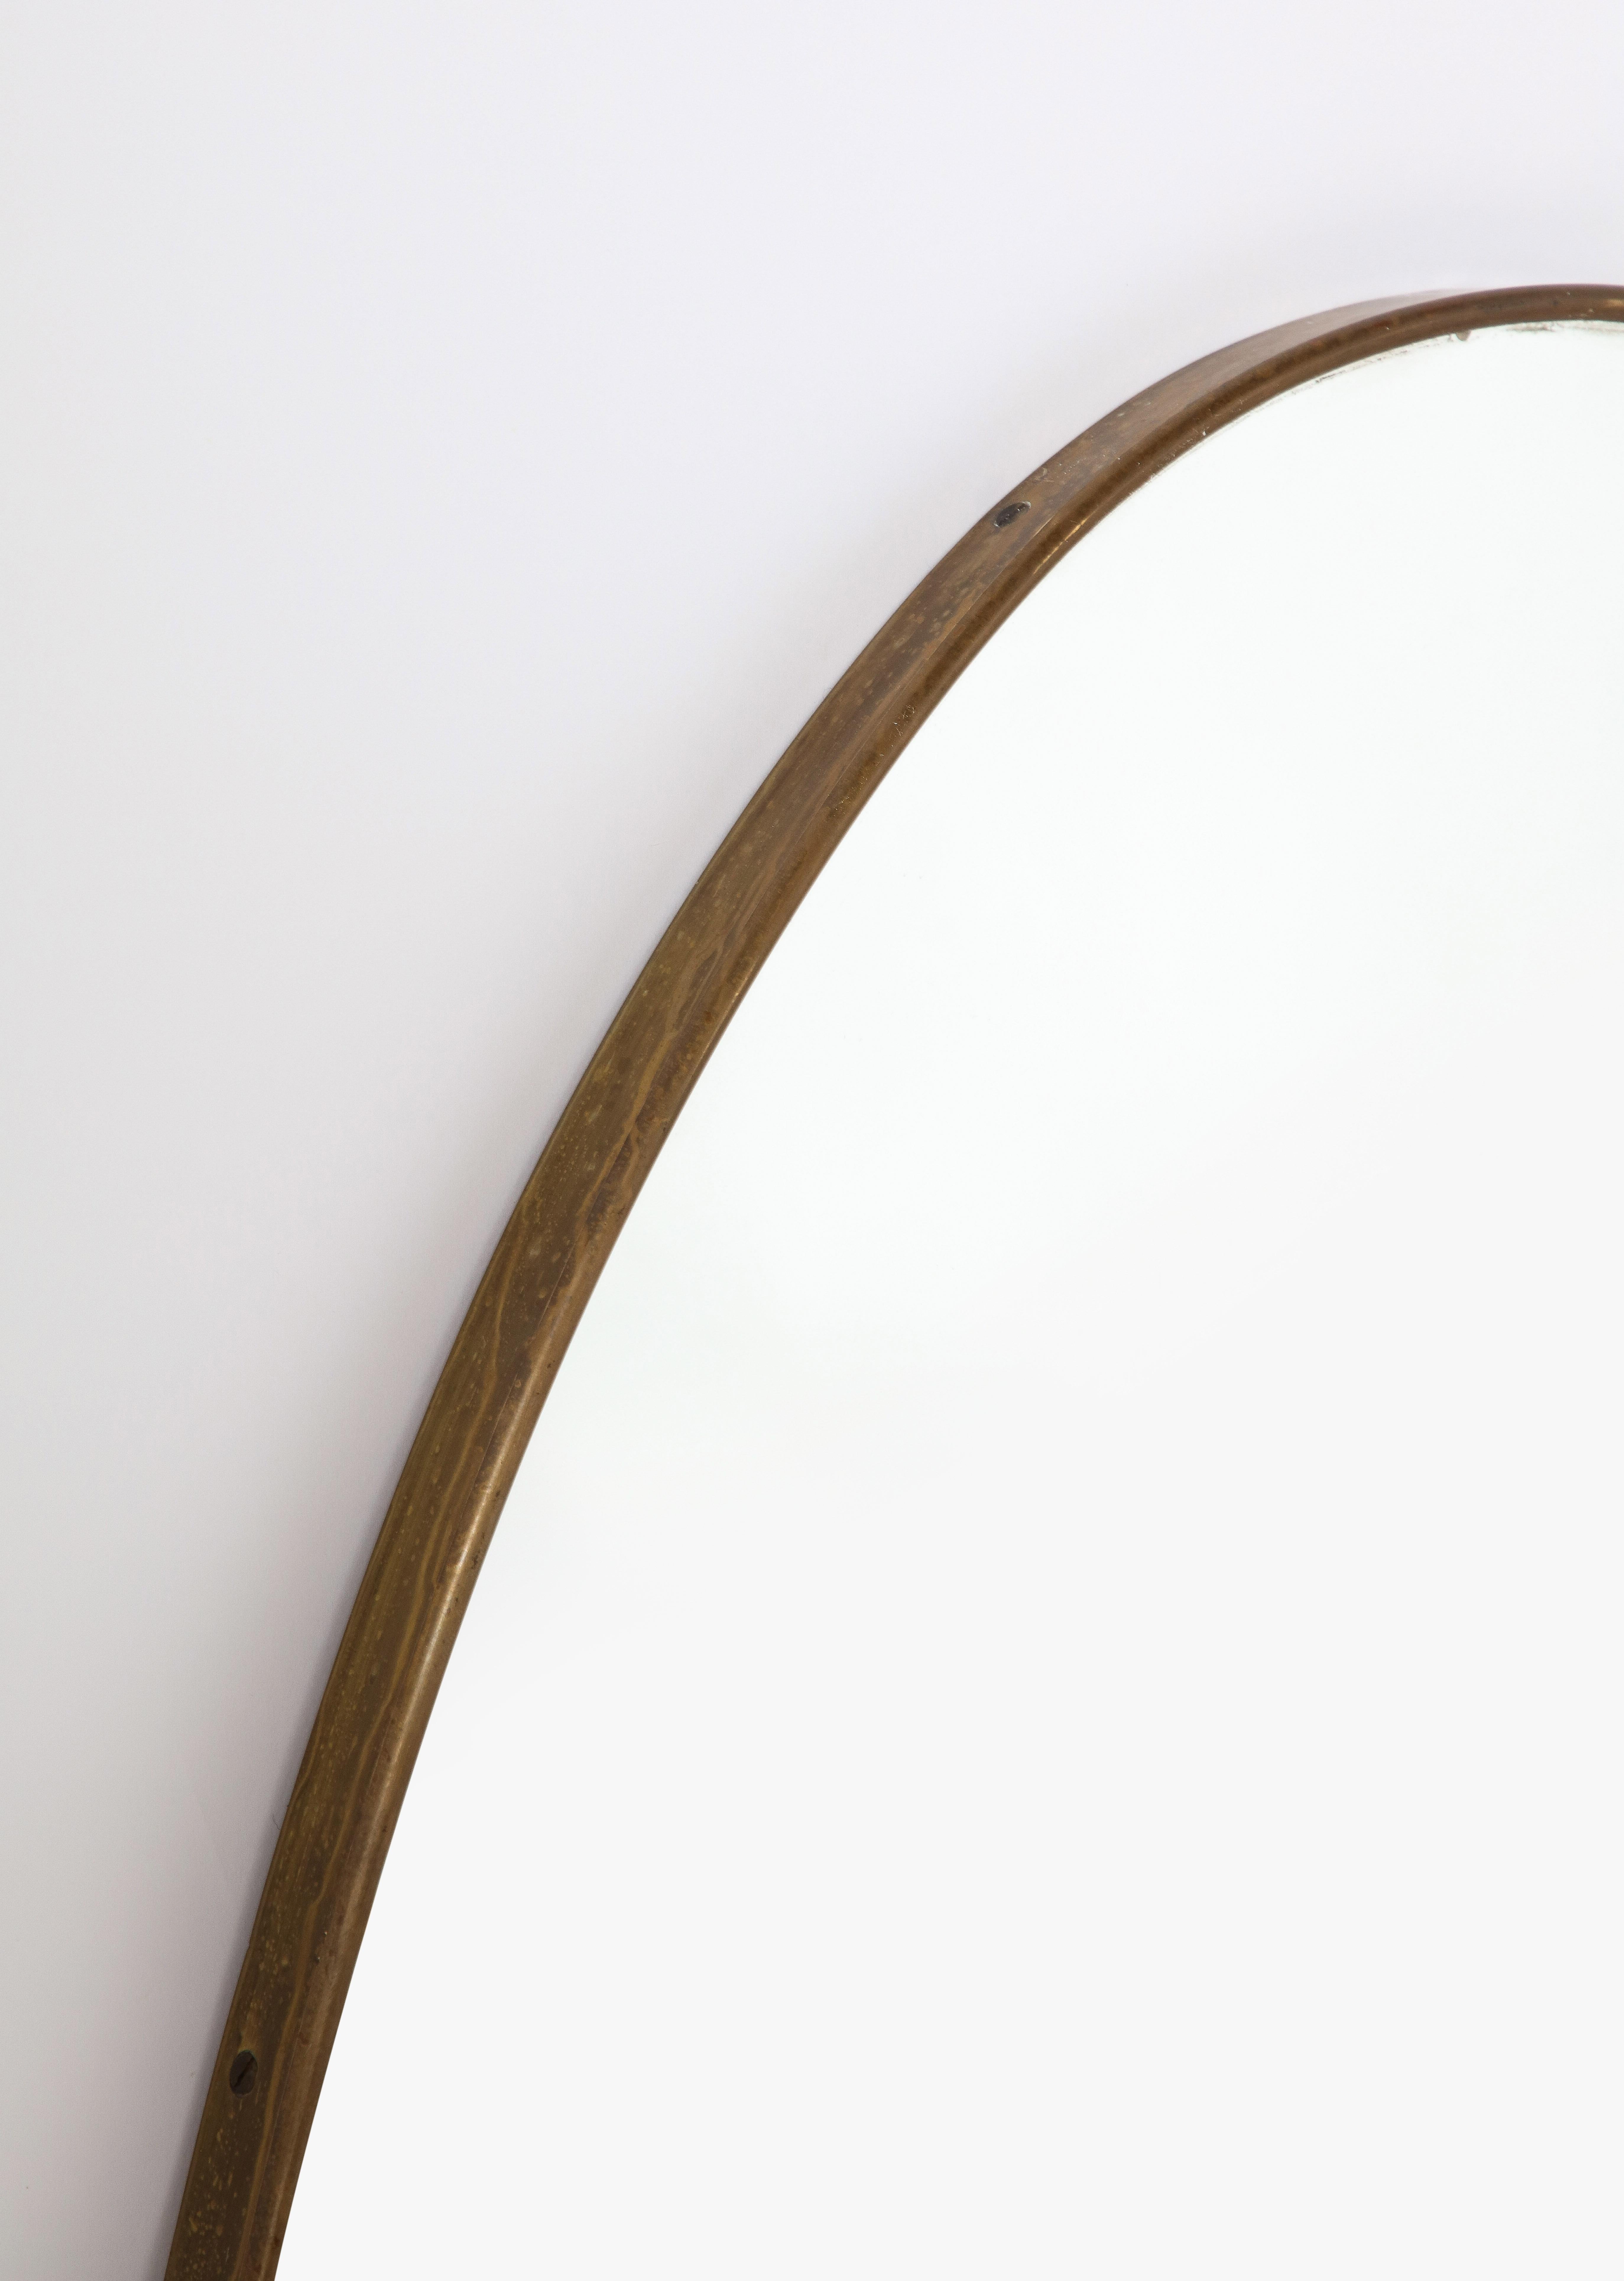 Pair of Italian Modernist Brass Oval Grand Scale Wall Mirrors, Italy, circa 1950 In Good Condition For Sale In New York, NY